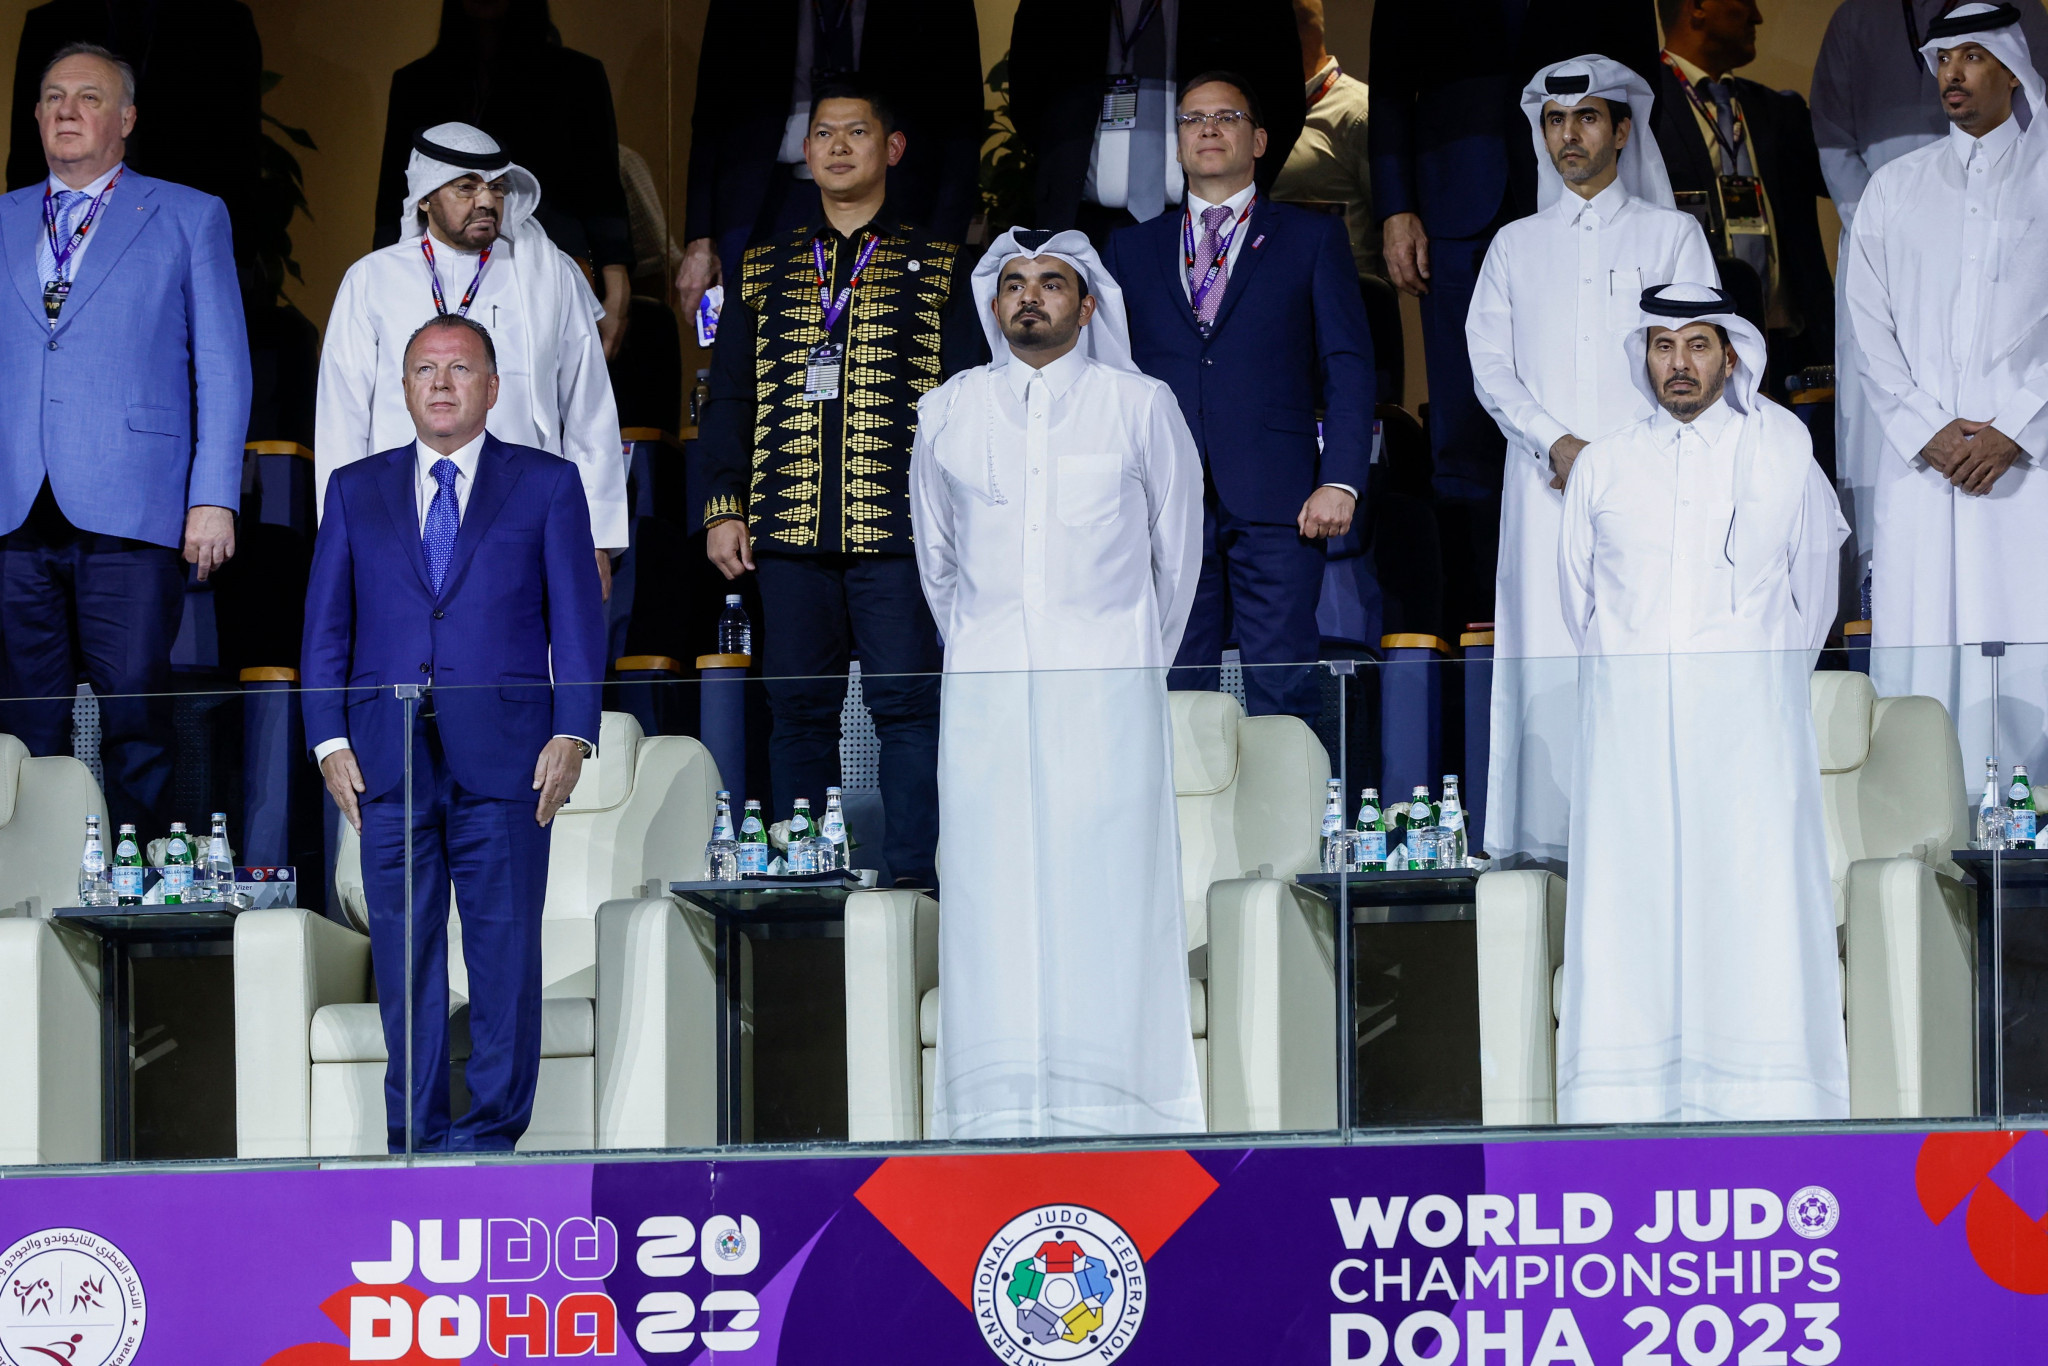 IJF President Marius Vizer, left, stands next to Qatar Olympic Committee leader Sheikh Joaan bin Hamad Al-Thani, centre, at the Opening Ceremony where he praised Doha's hosting of major events ©Getty Images